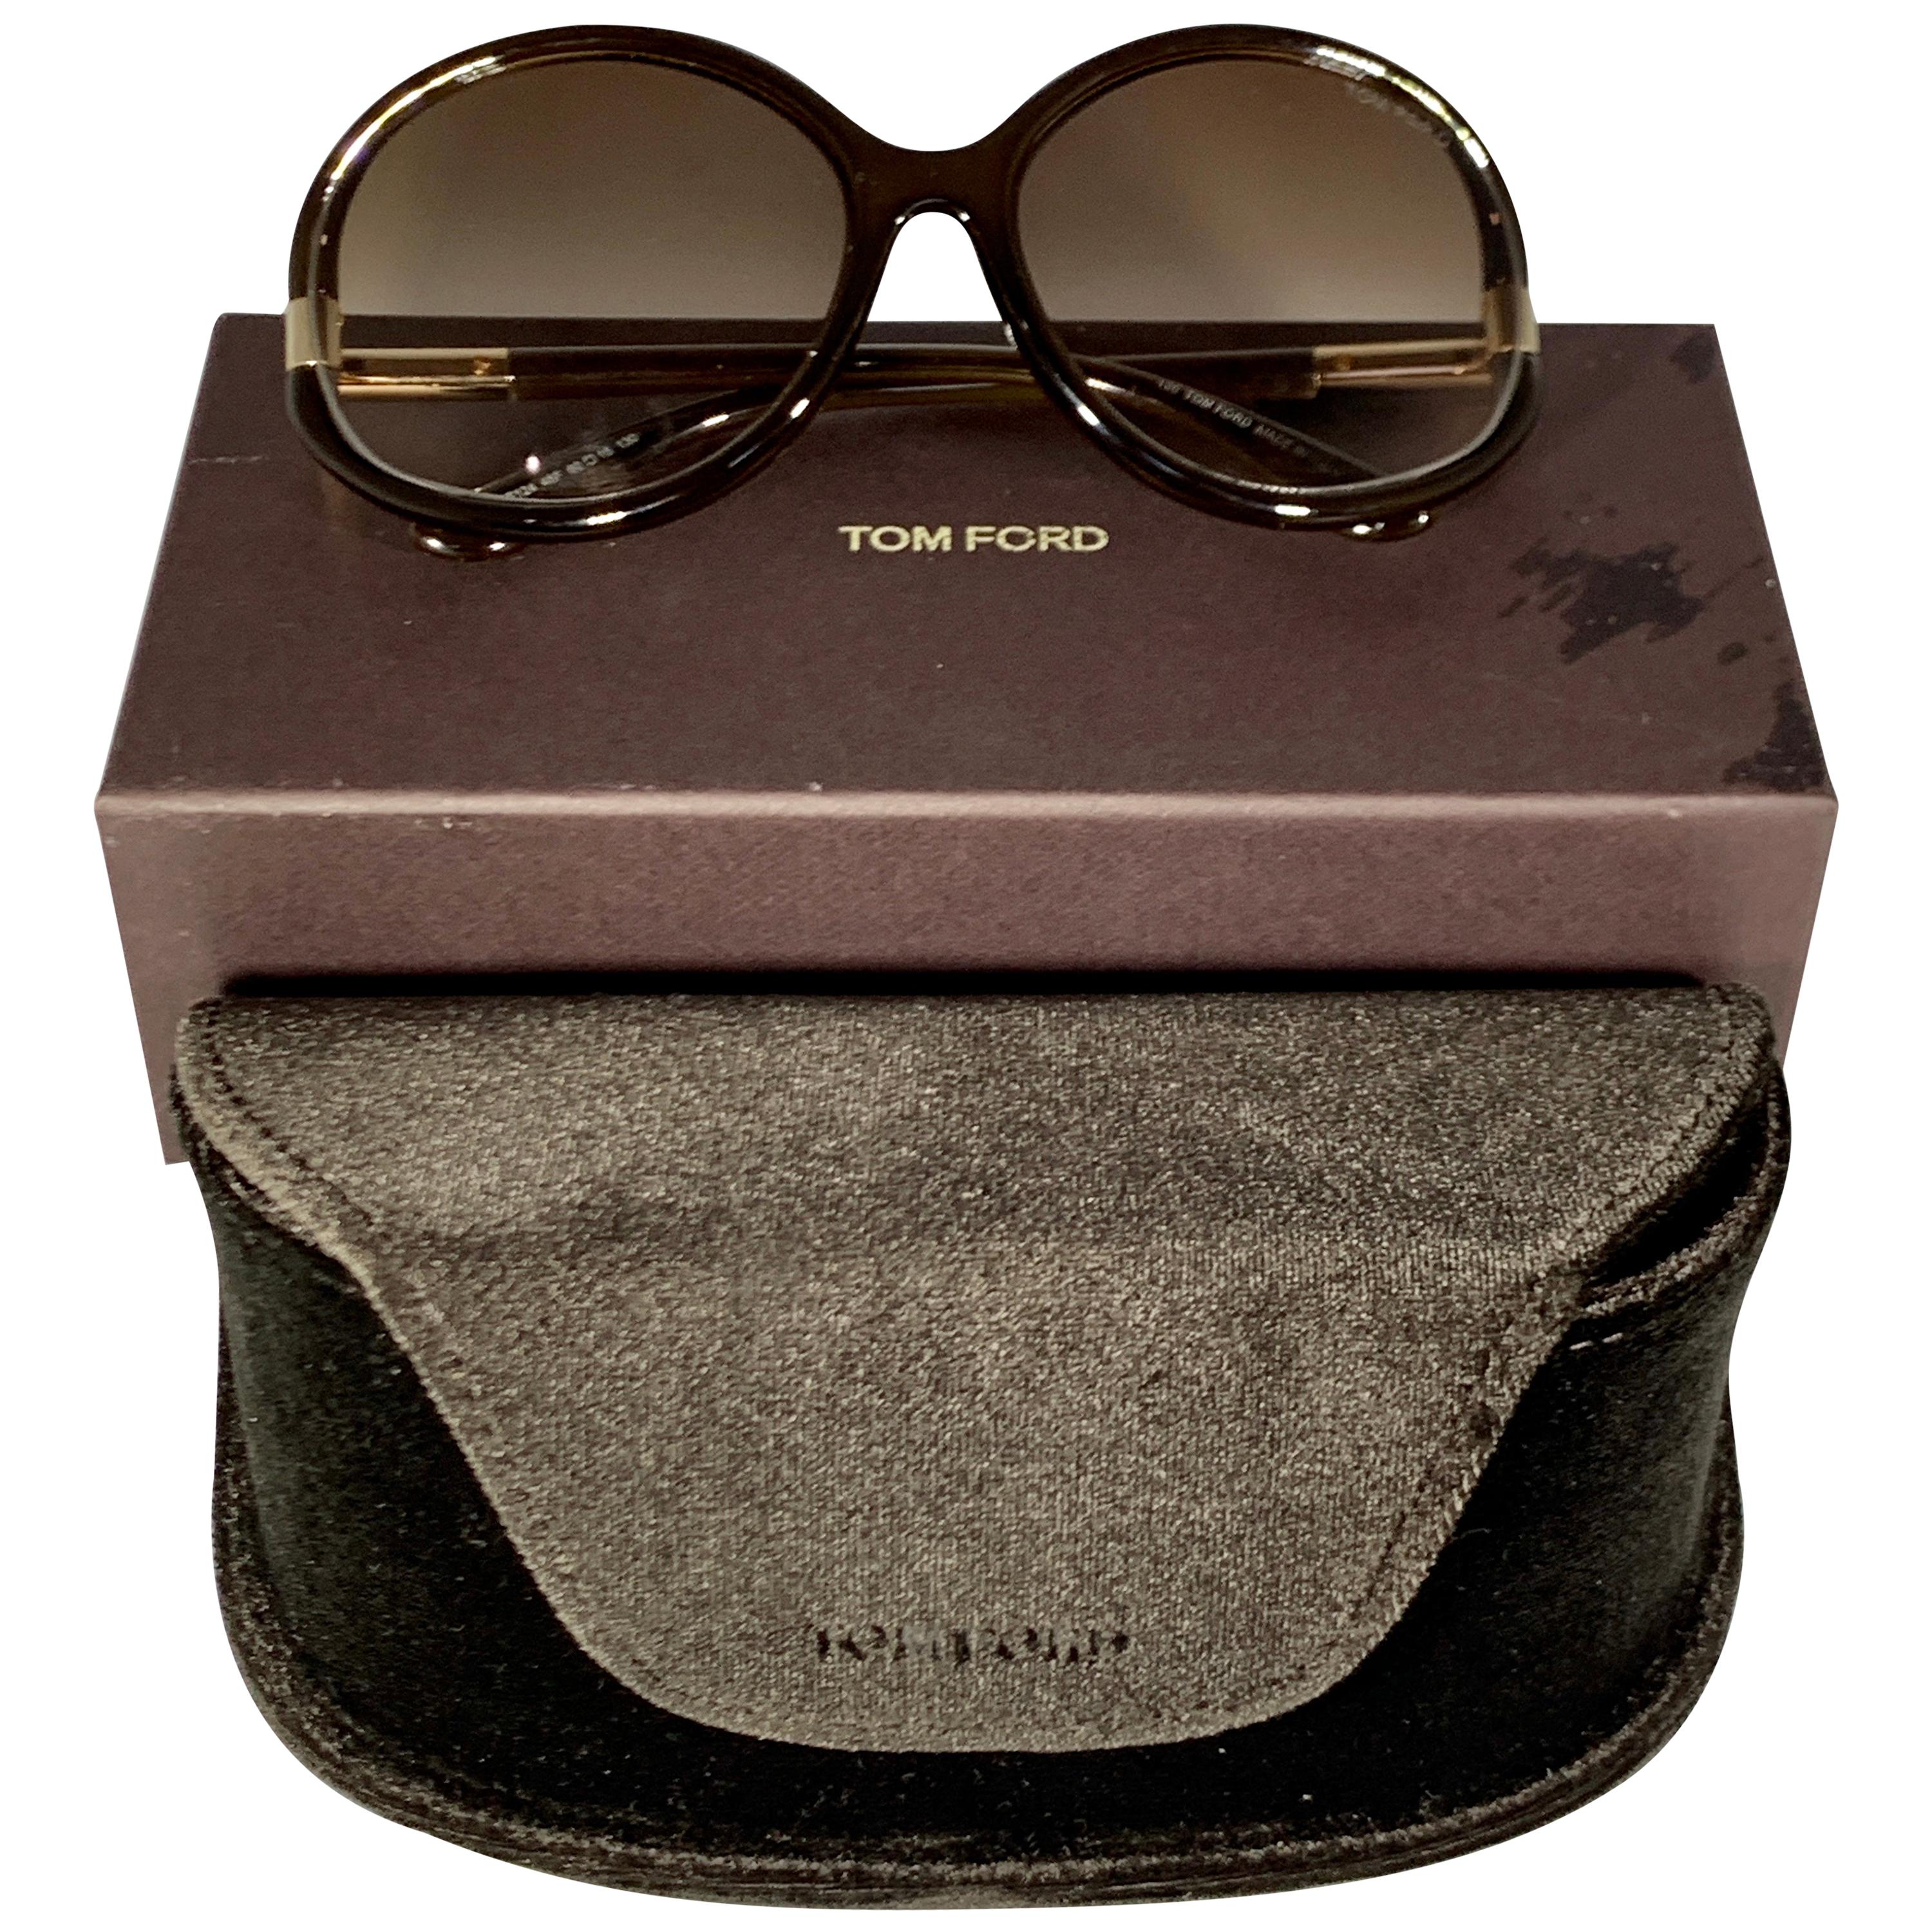 Tom Ford Brand New  FT 0124 60-15-130 48F Brown Women Sunglasses, Made in Italy